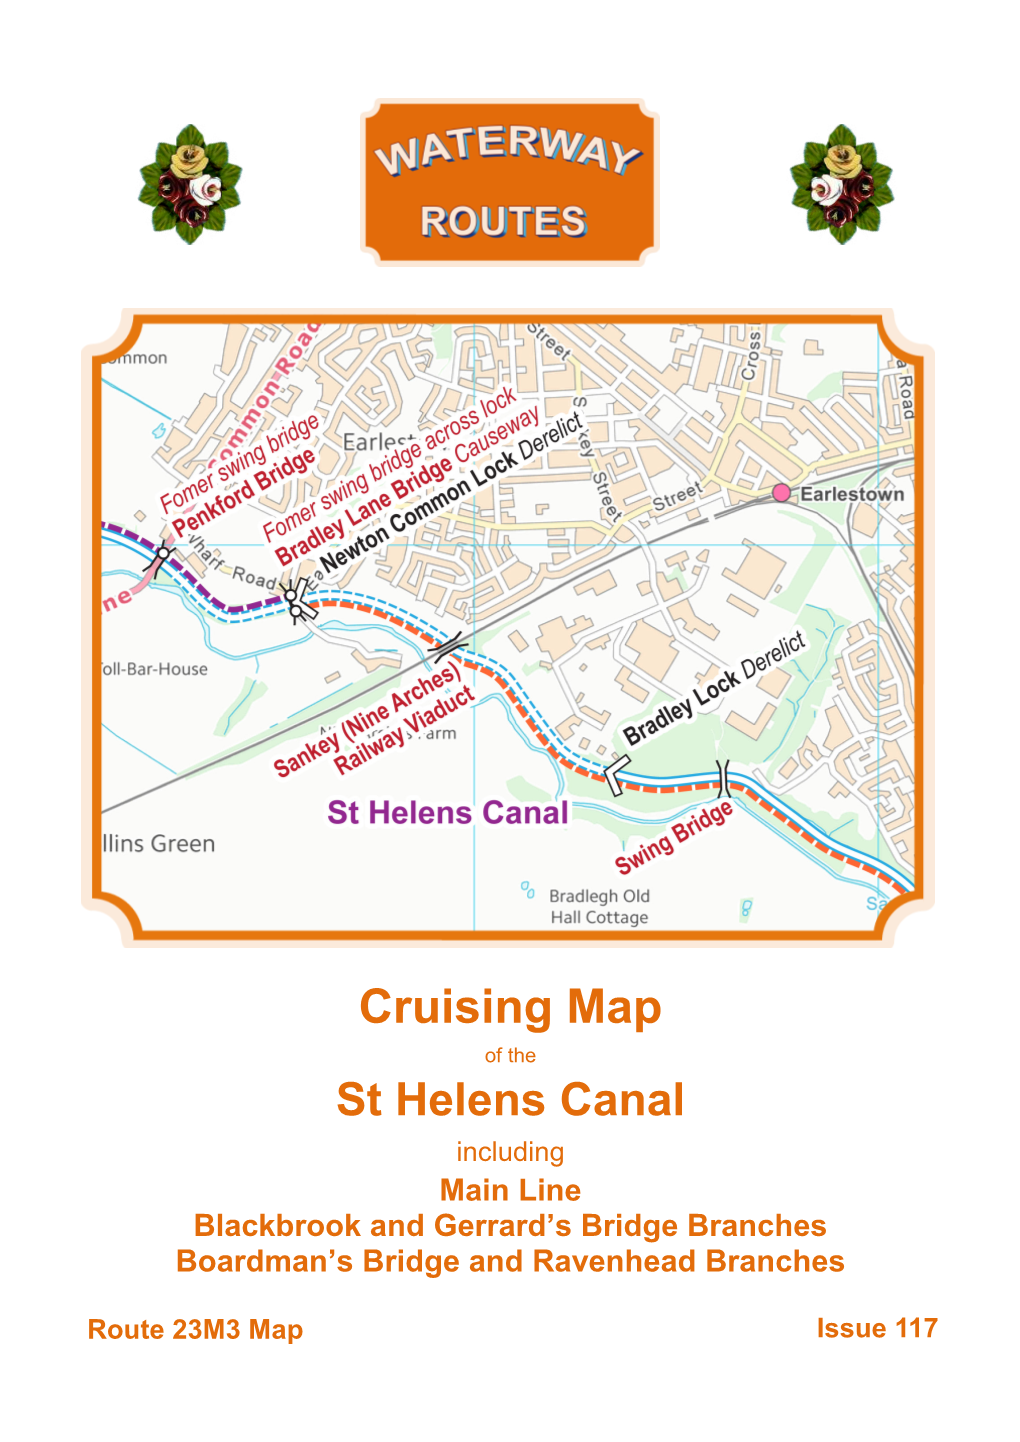 St Helens Canal Including Main Line Blackbrook and Gerrard’S Bridge Branches Boardman’S Bridge and Ravenhead Branches